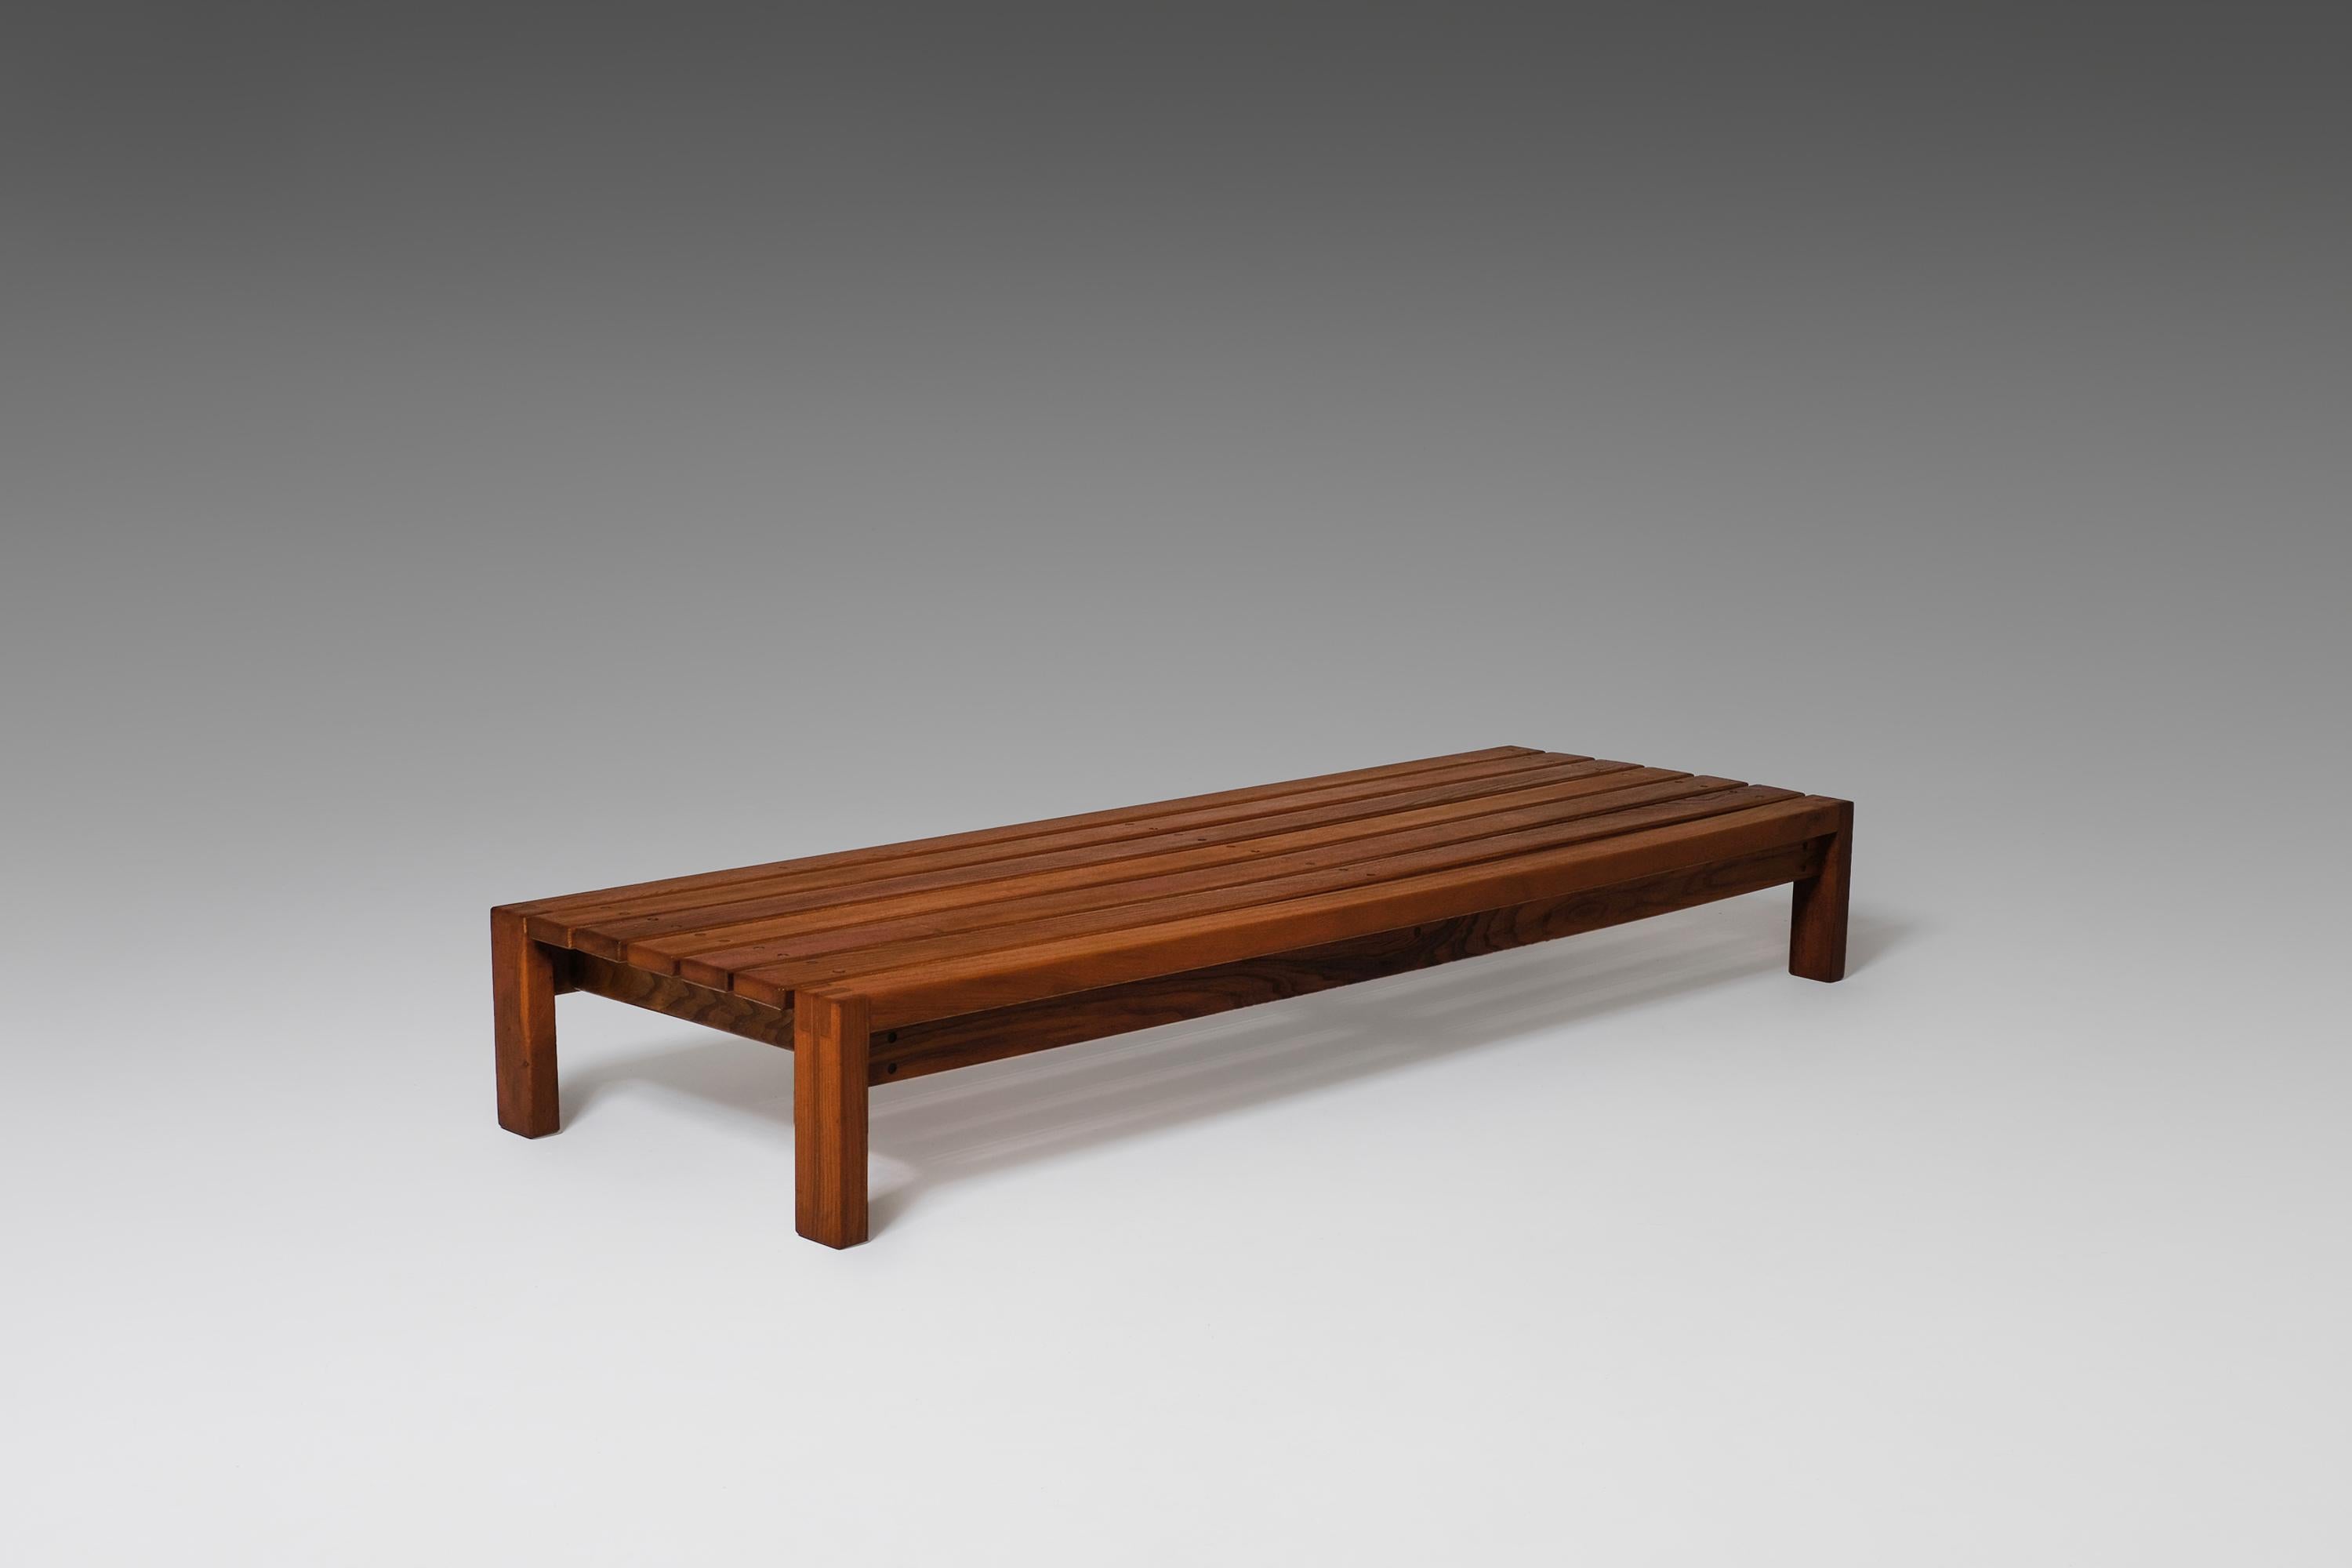 Solid elm bench or large coffee table in the style of Pierre Chapo, France, 1960s. Made of solid warm colored elmwood with a beautiful exposed grain, giving the bench a rich, warm and natural appearance. All handcrafted with great details showing